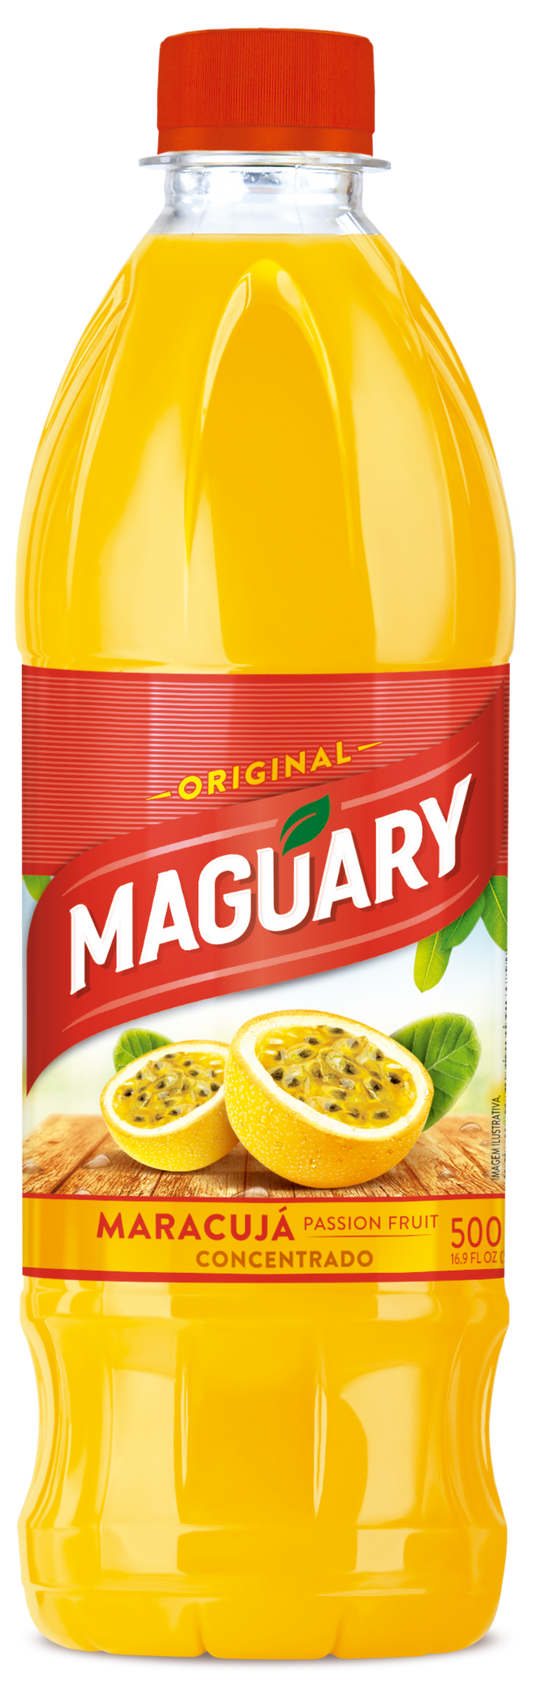 Maguary Maracuja Passion fruit Concentrado 500ml